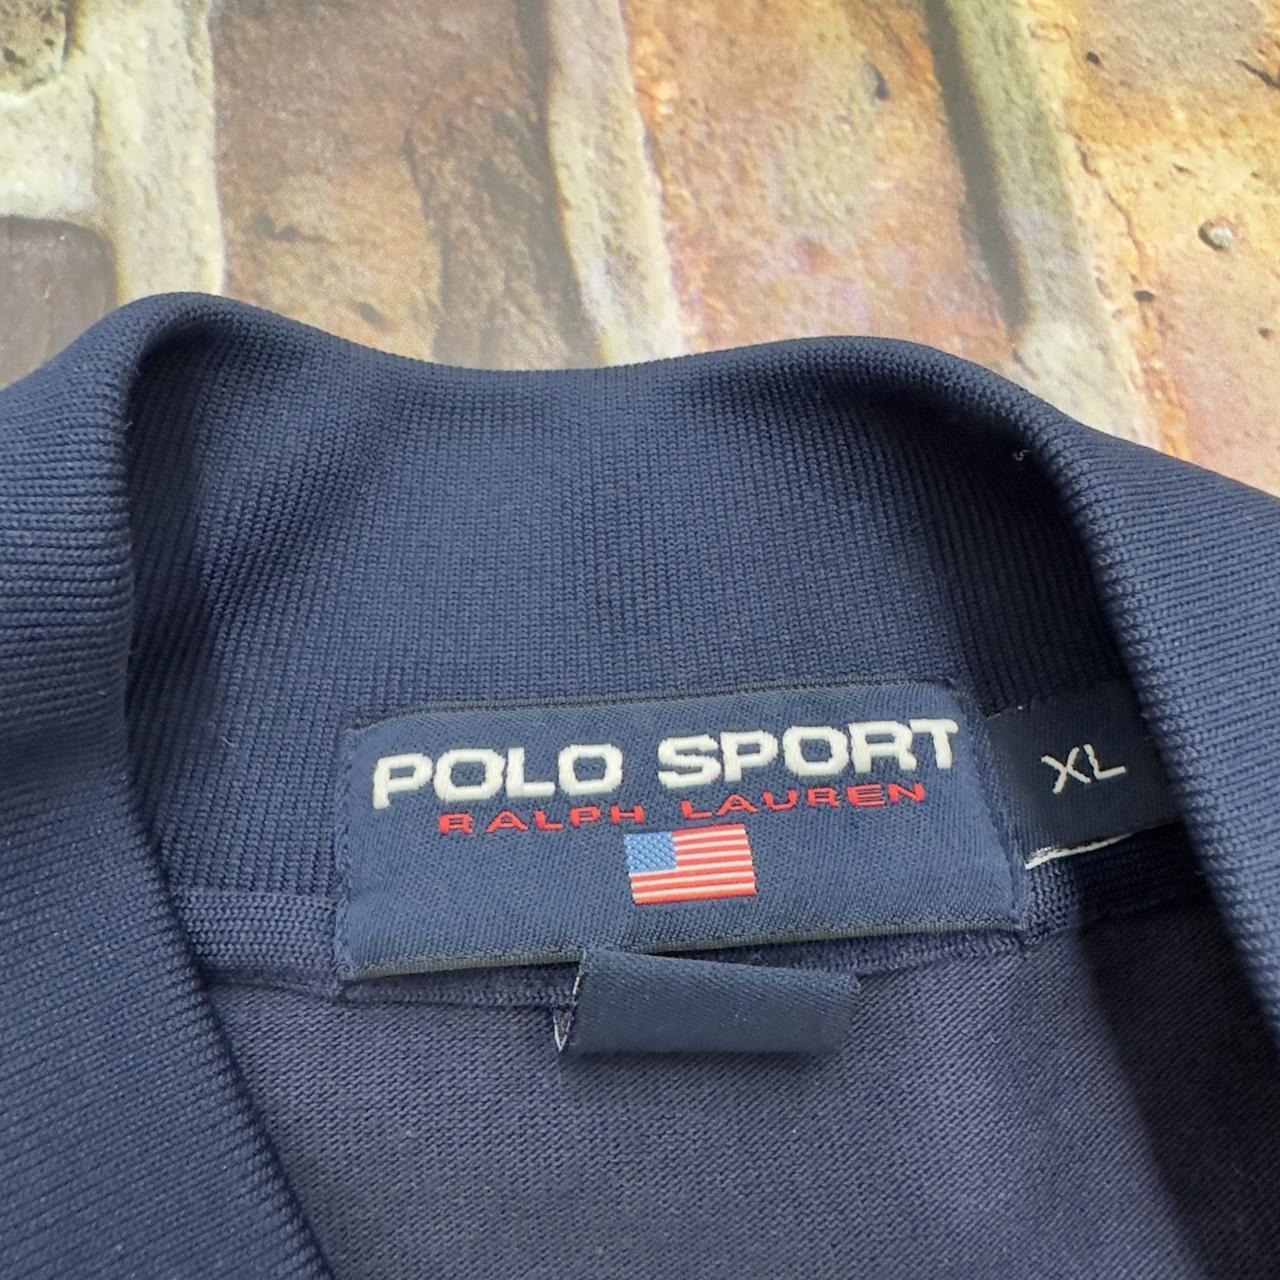 Polo Sport Men's Navy and Red Jacket | Depop